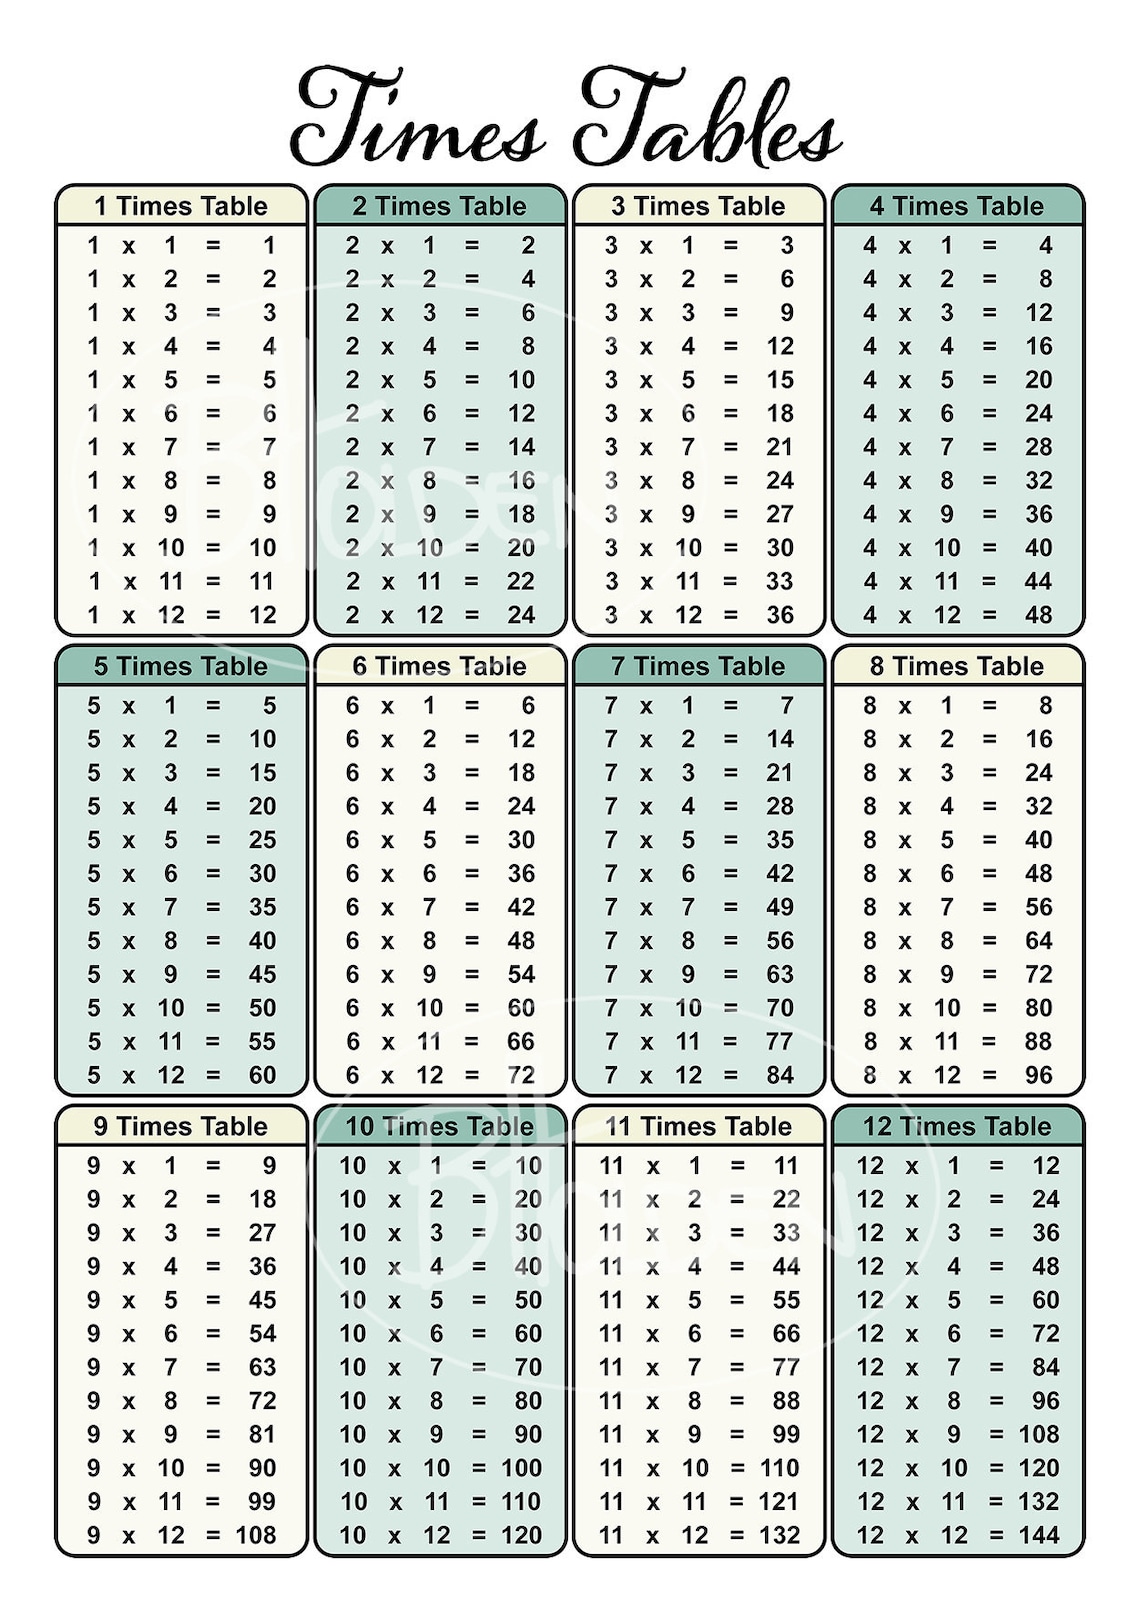 Times Table Chart Poster Print - Etsy Sweden